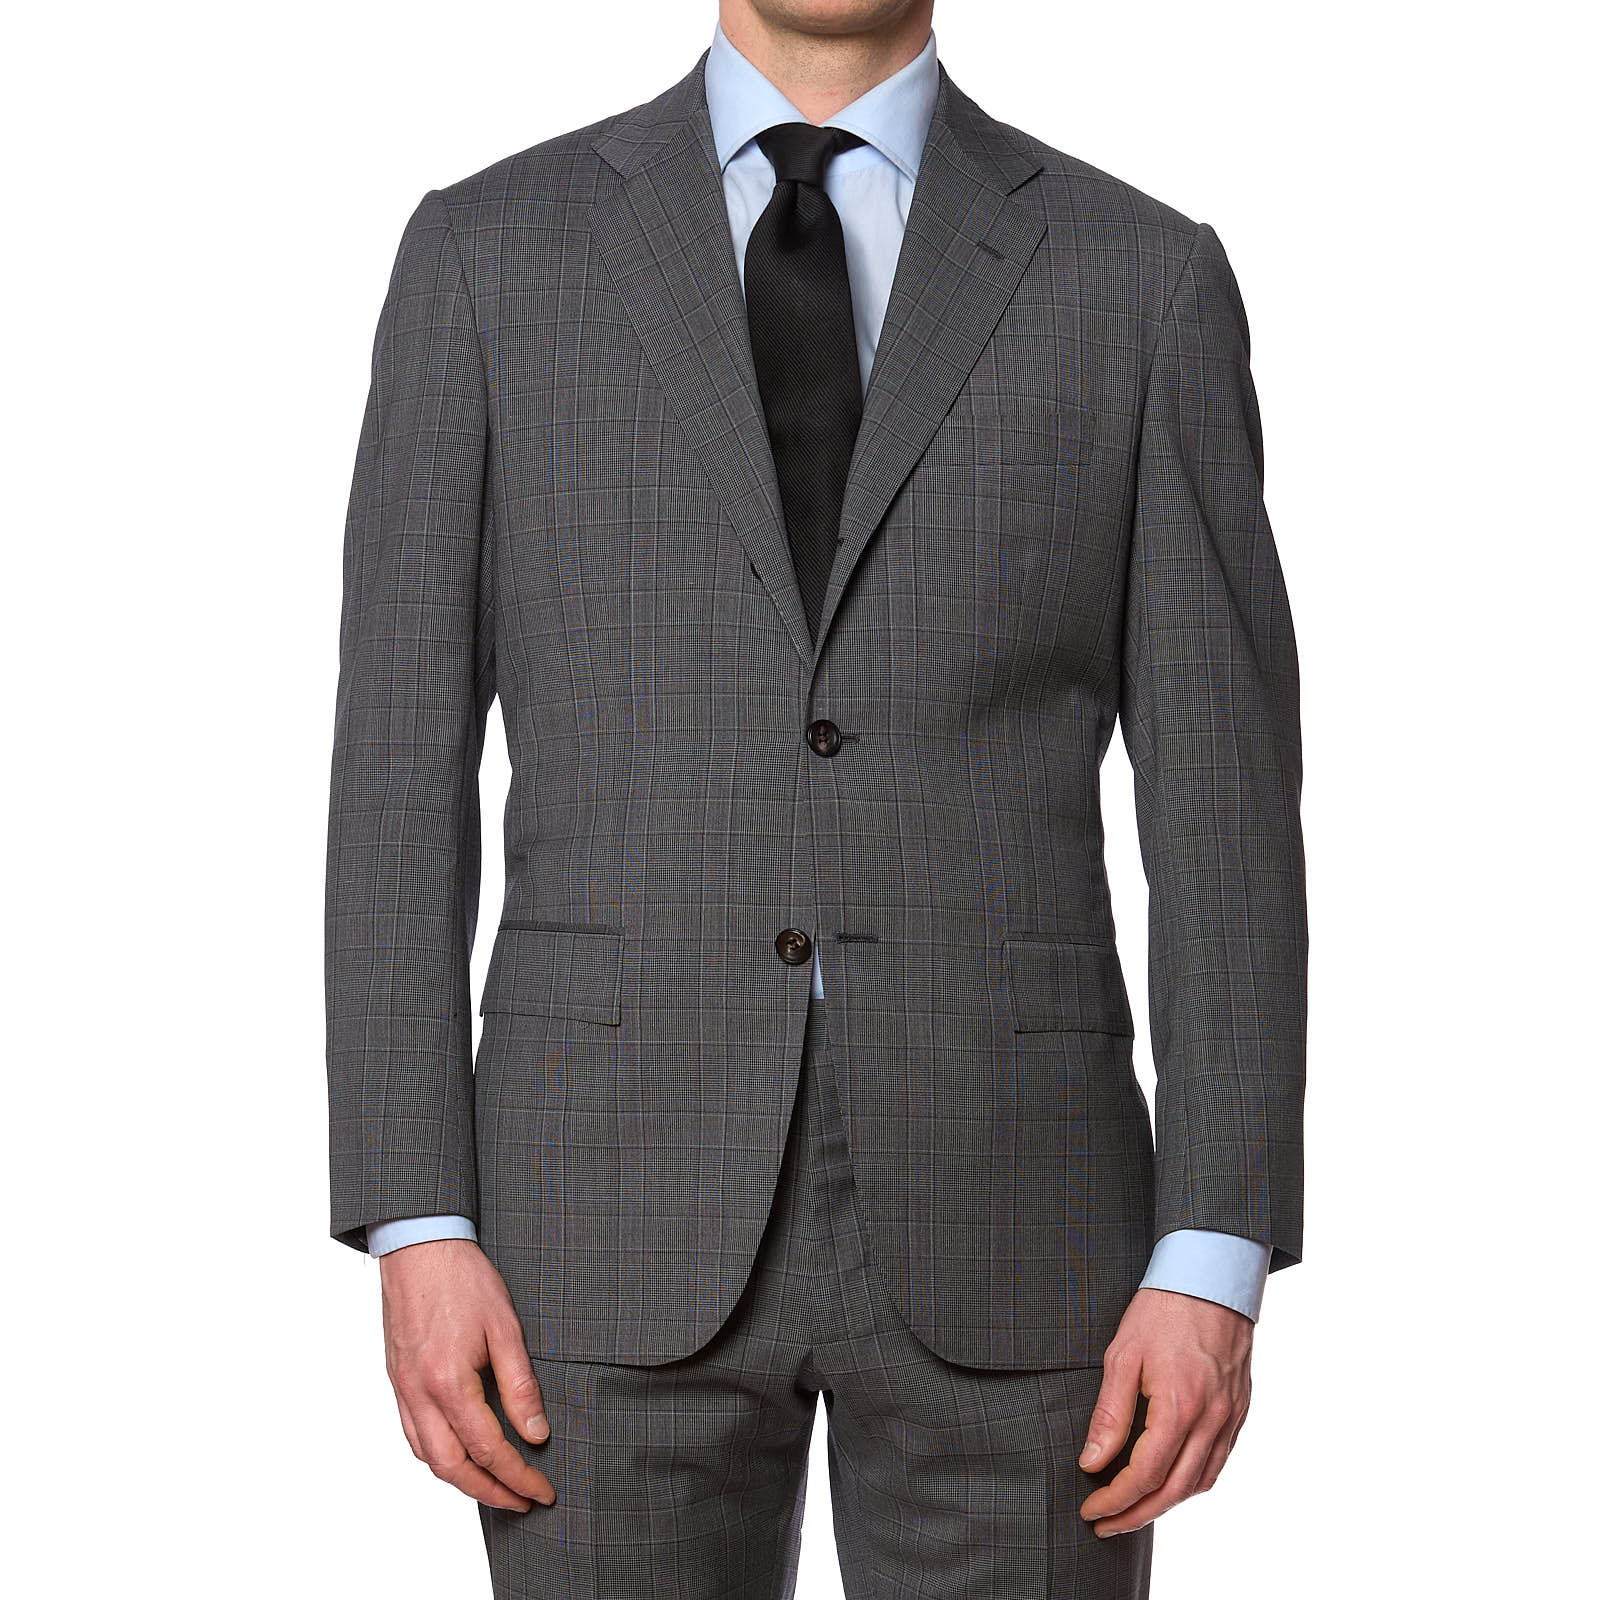 KITON Napoli for VANNUCCI Gray Prince of Wales Wool  Suit EU 52 NEW US 42